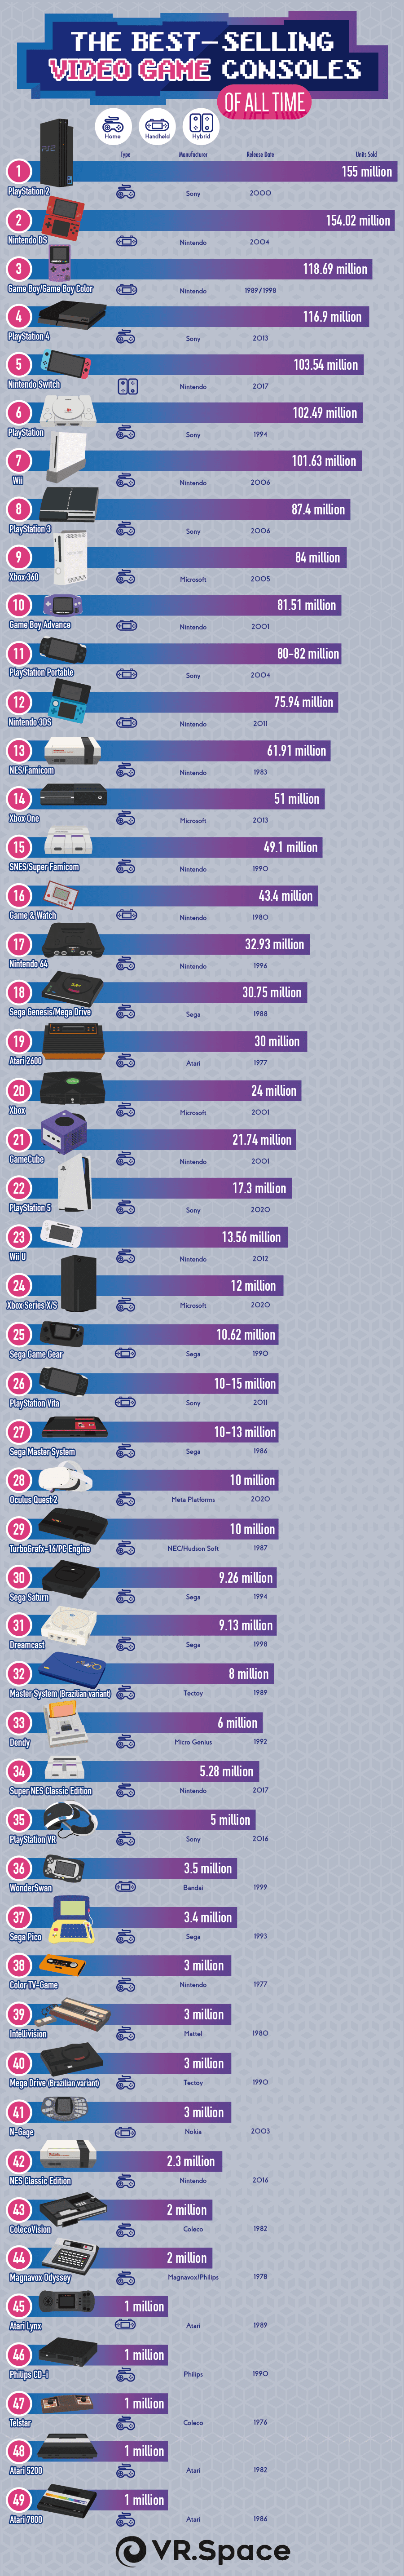 The Best-Selling Video Game Consoles of All Time